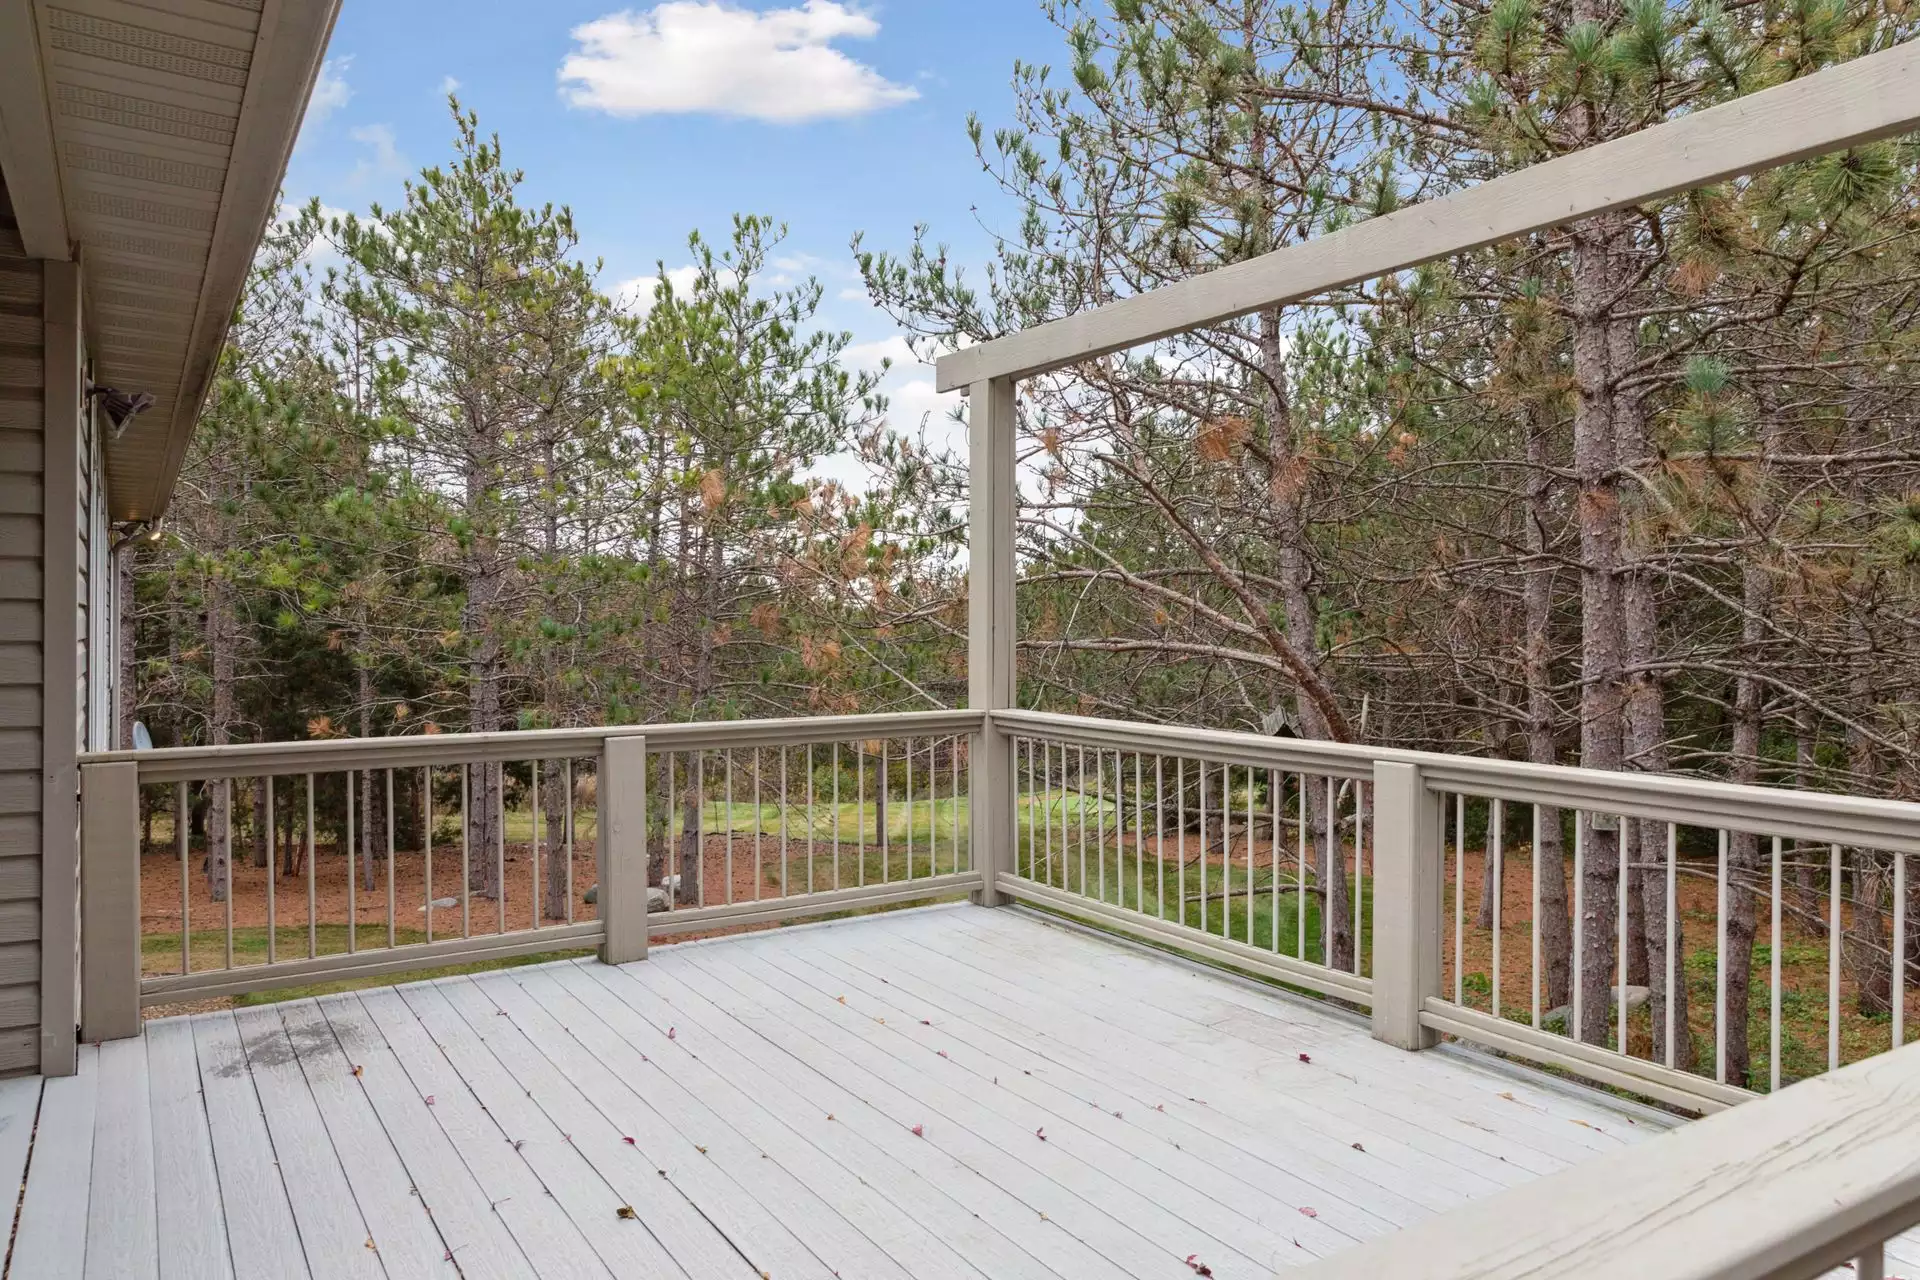 Enjoy overlooking your large private 2.5 acres